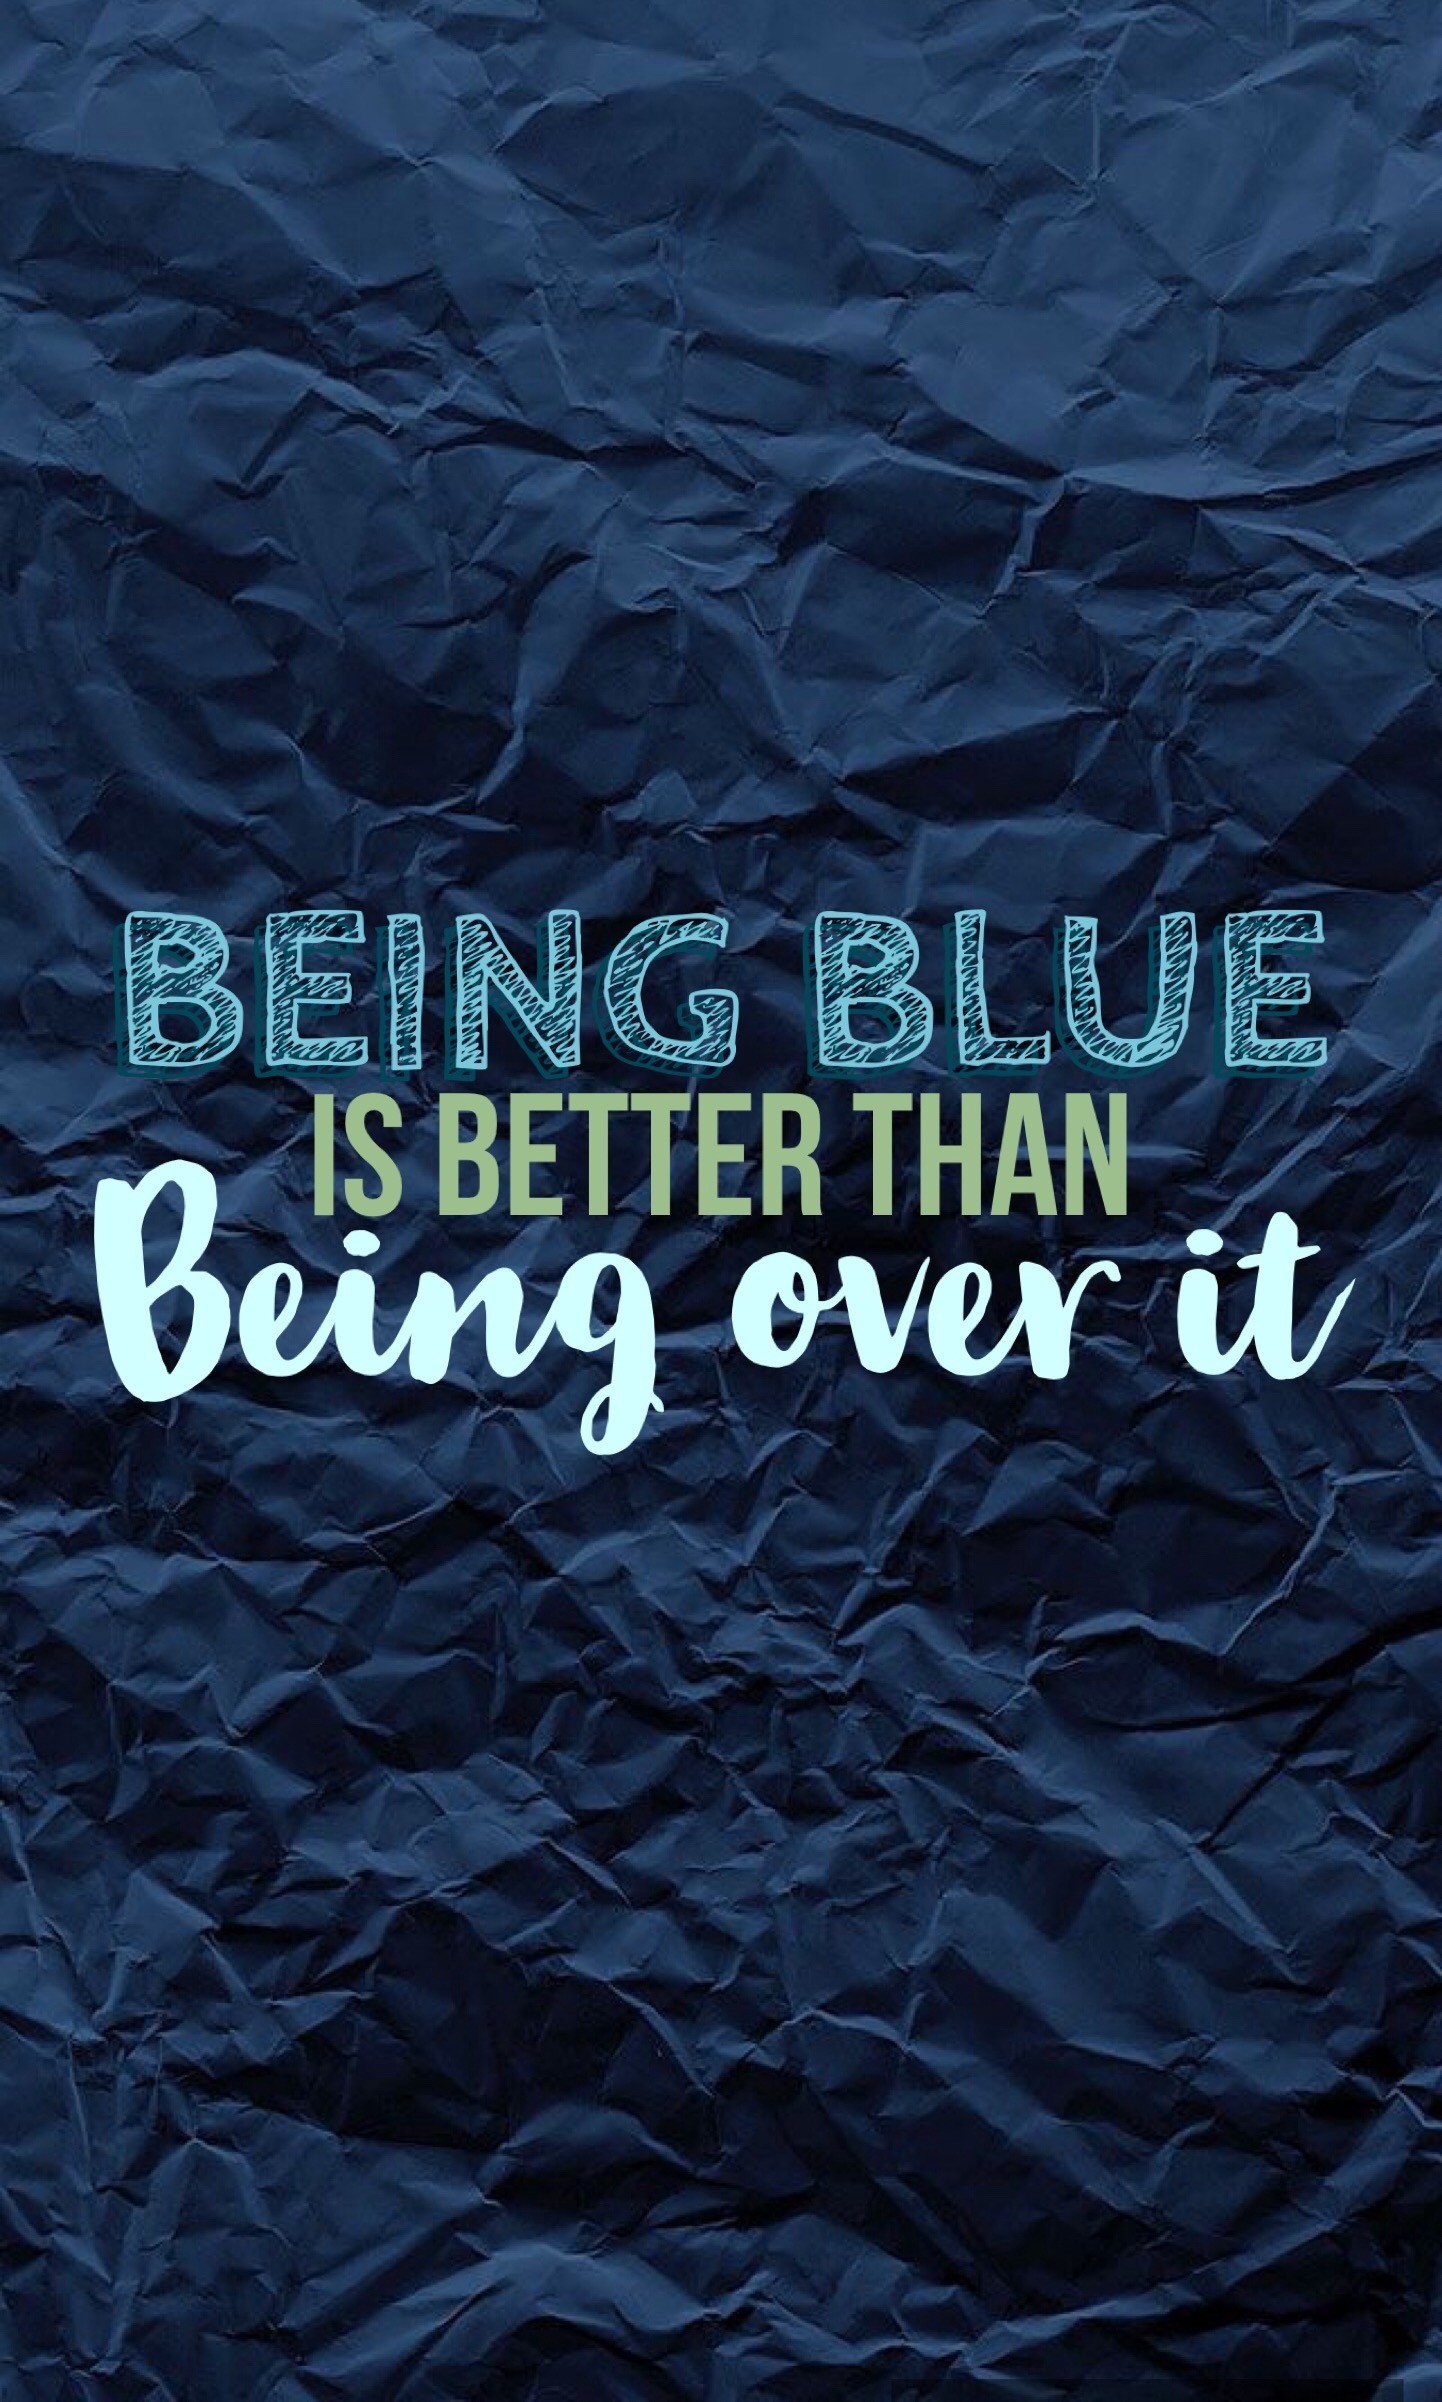 1442x2402 Hallelujah by Panic! at the disco lyrics "being blue is better than being  over